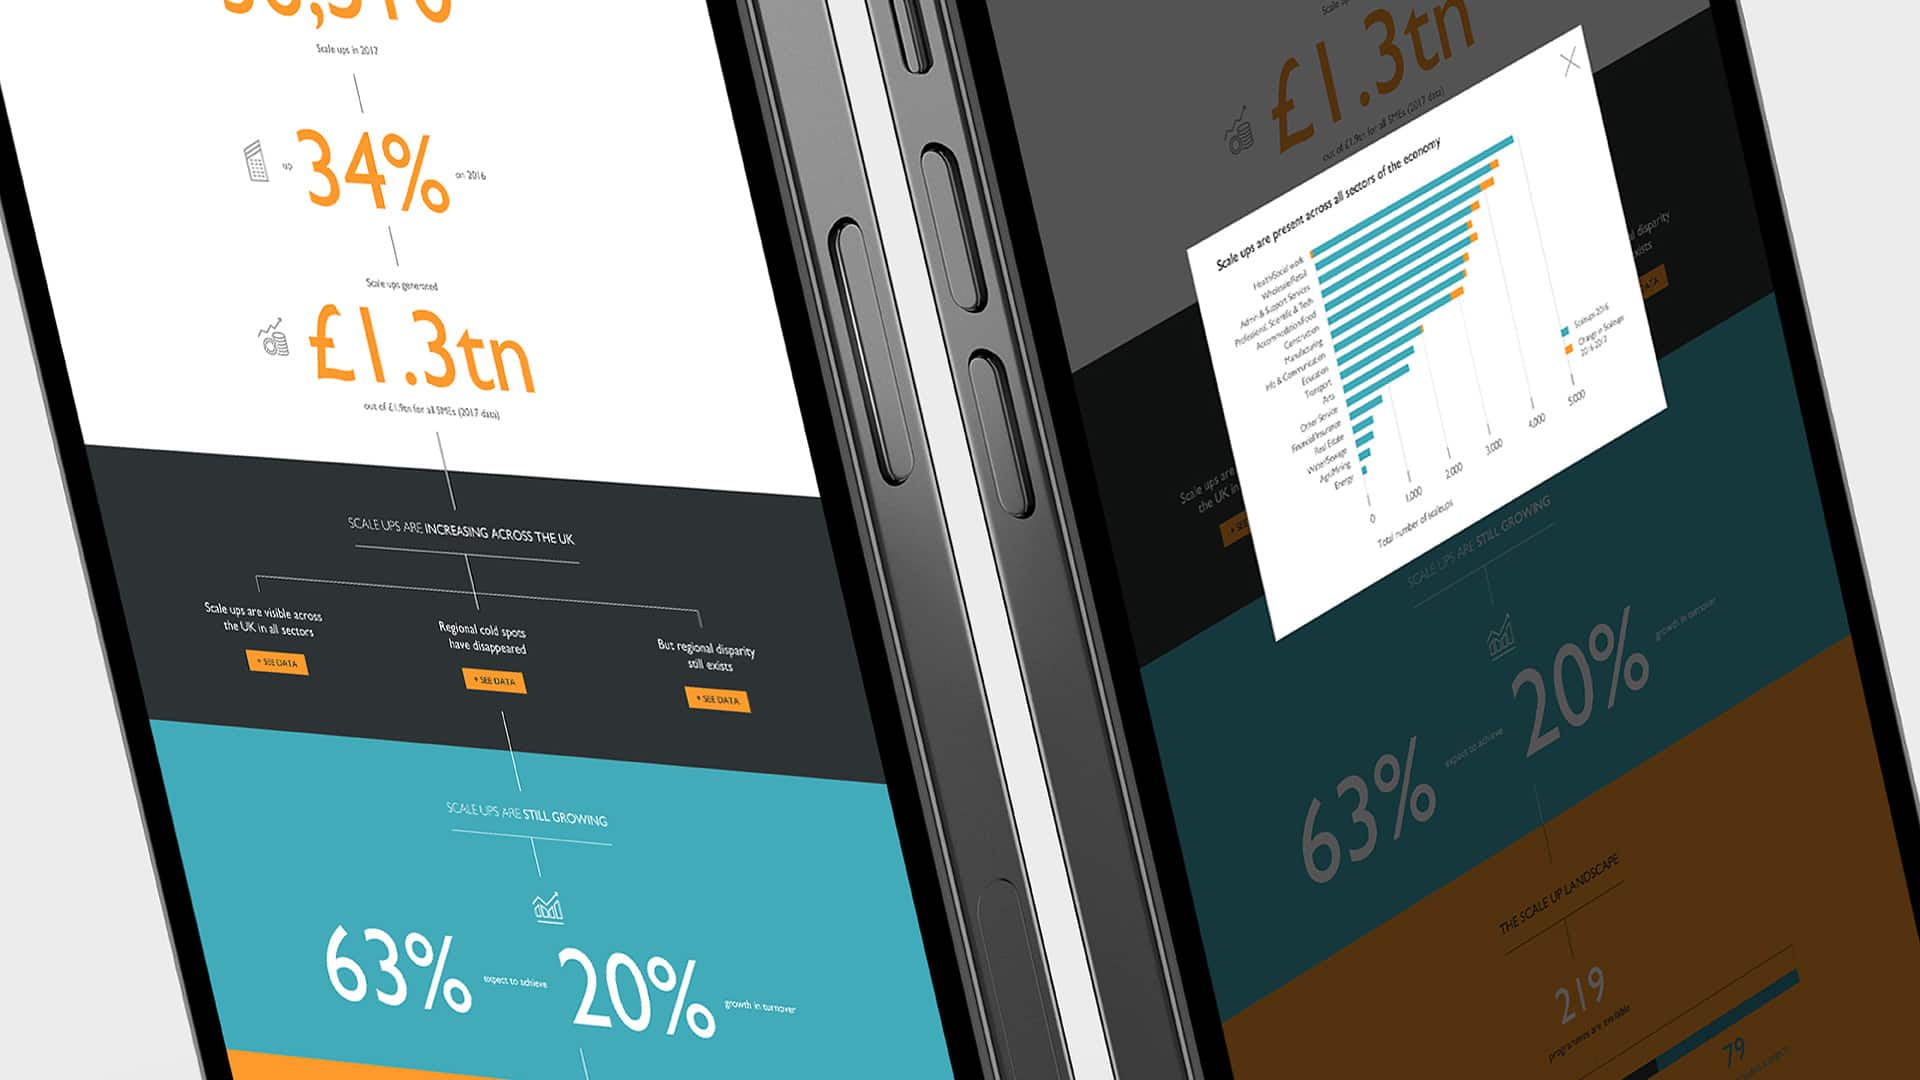 A close-up section of two mobile phones displaying a ScaleUp Institute 'Scaleups Are' Infographic Animation